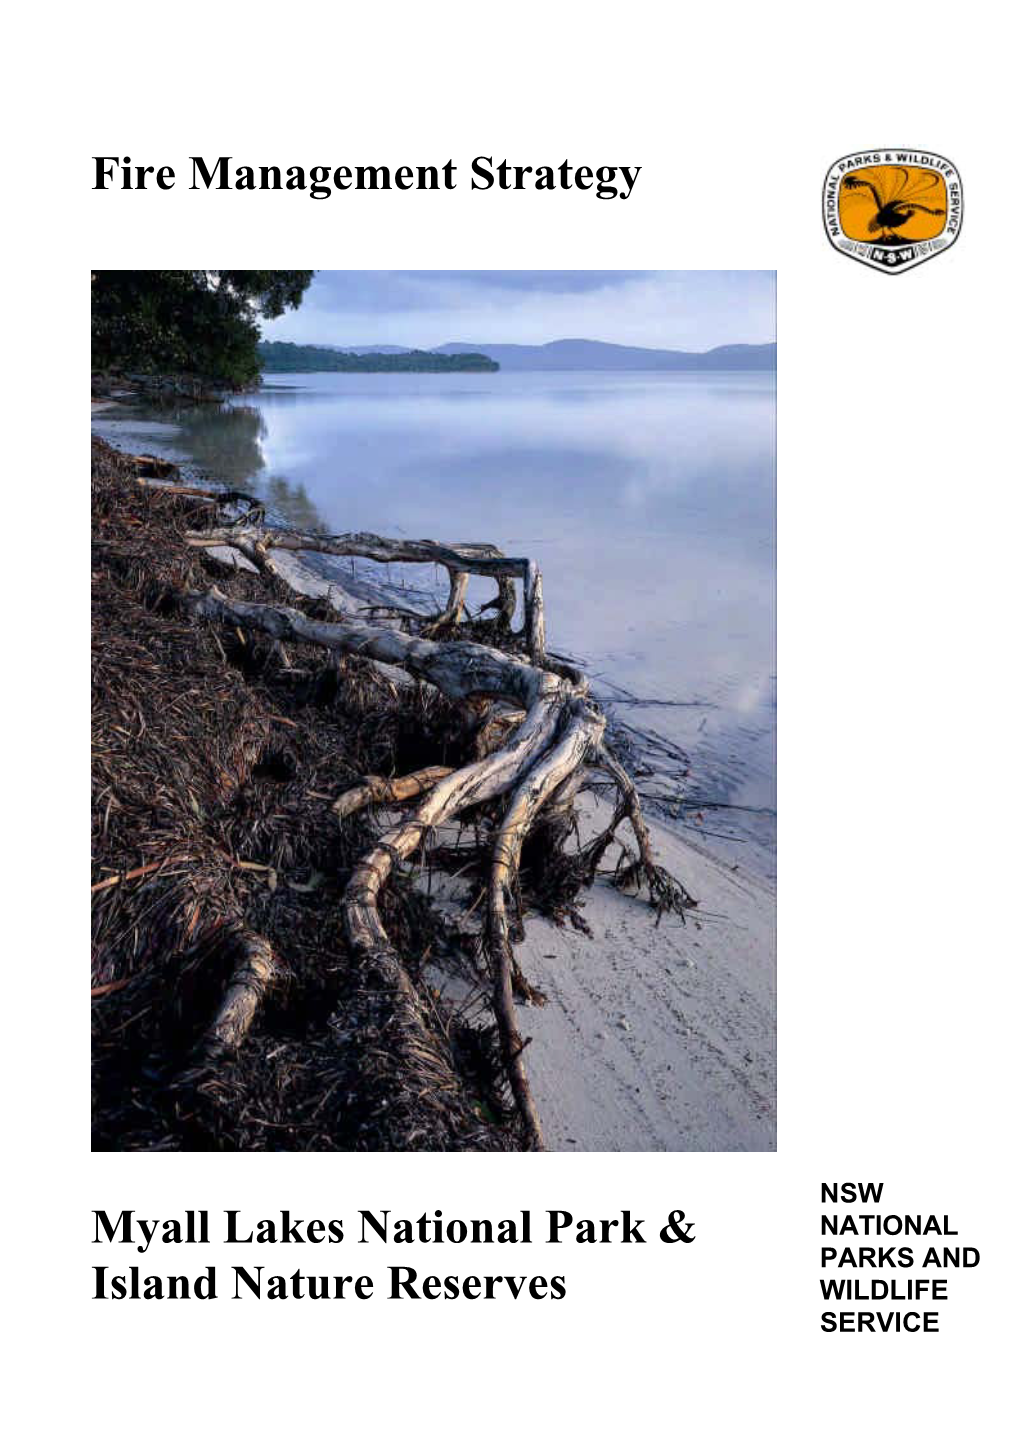 Myall Lakes National Park and Island Nature Reserves Fire Managment